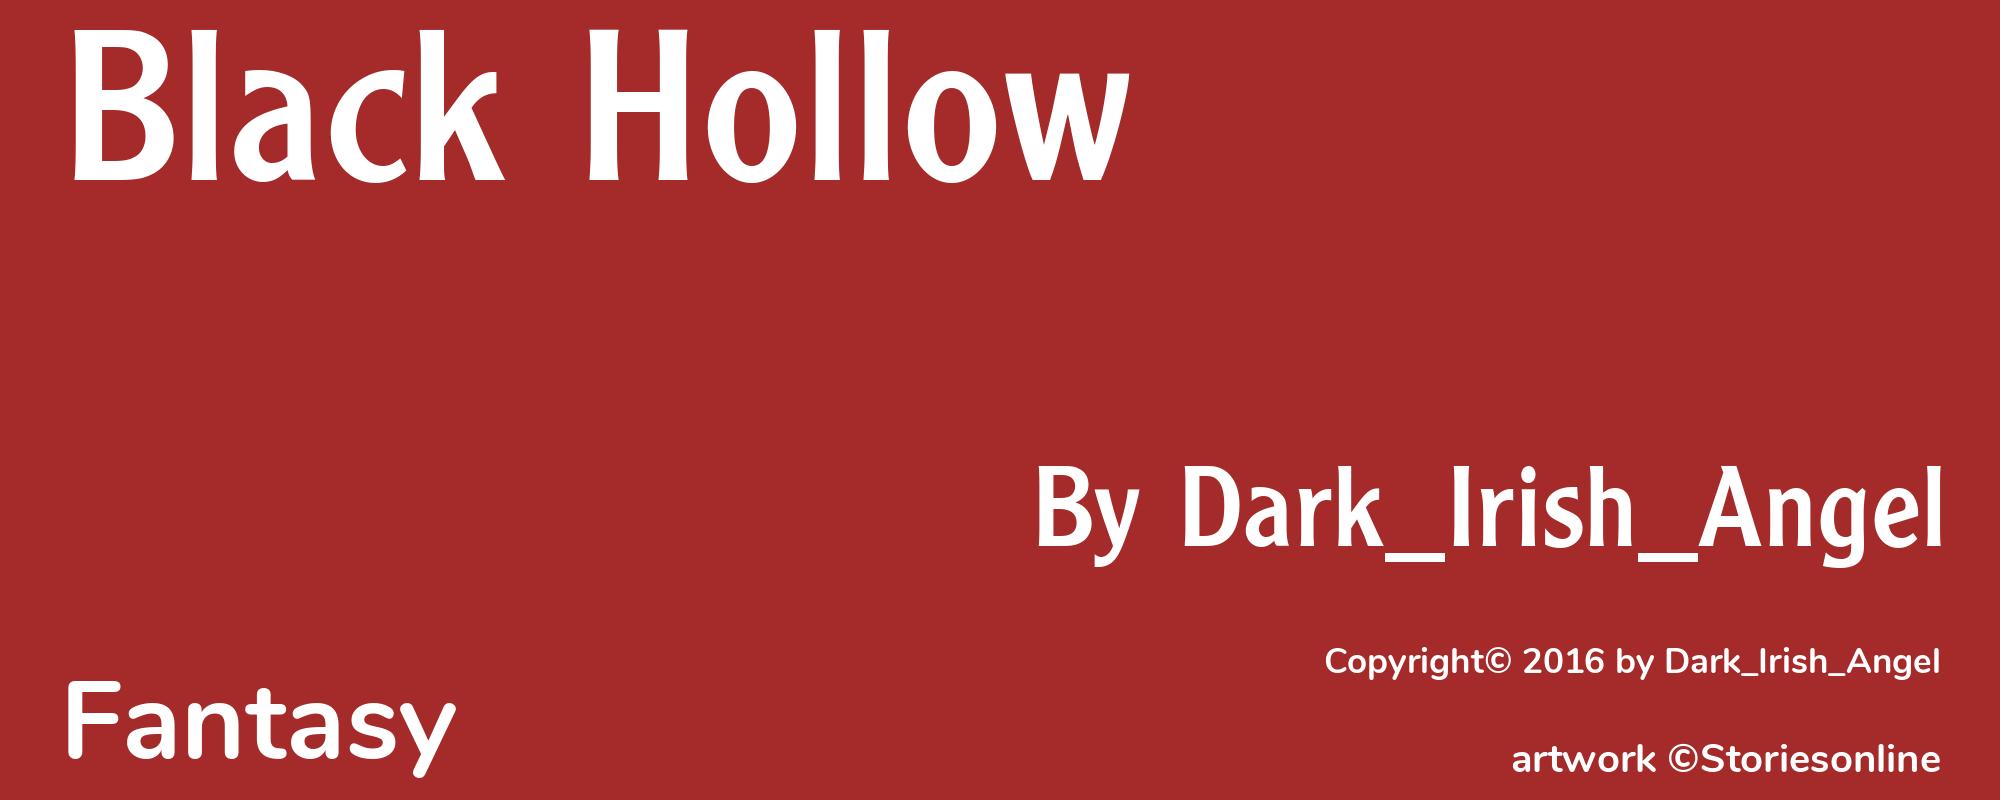 Black Hollow - Cover